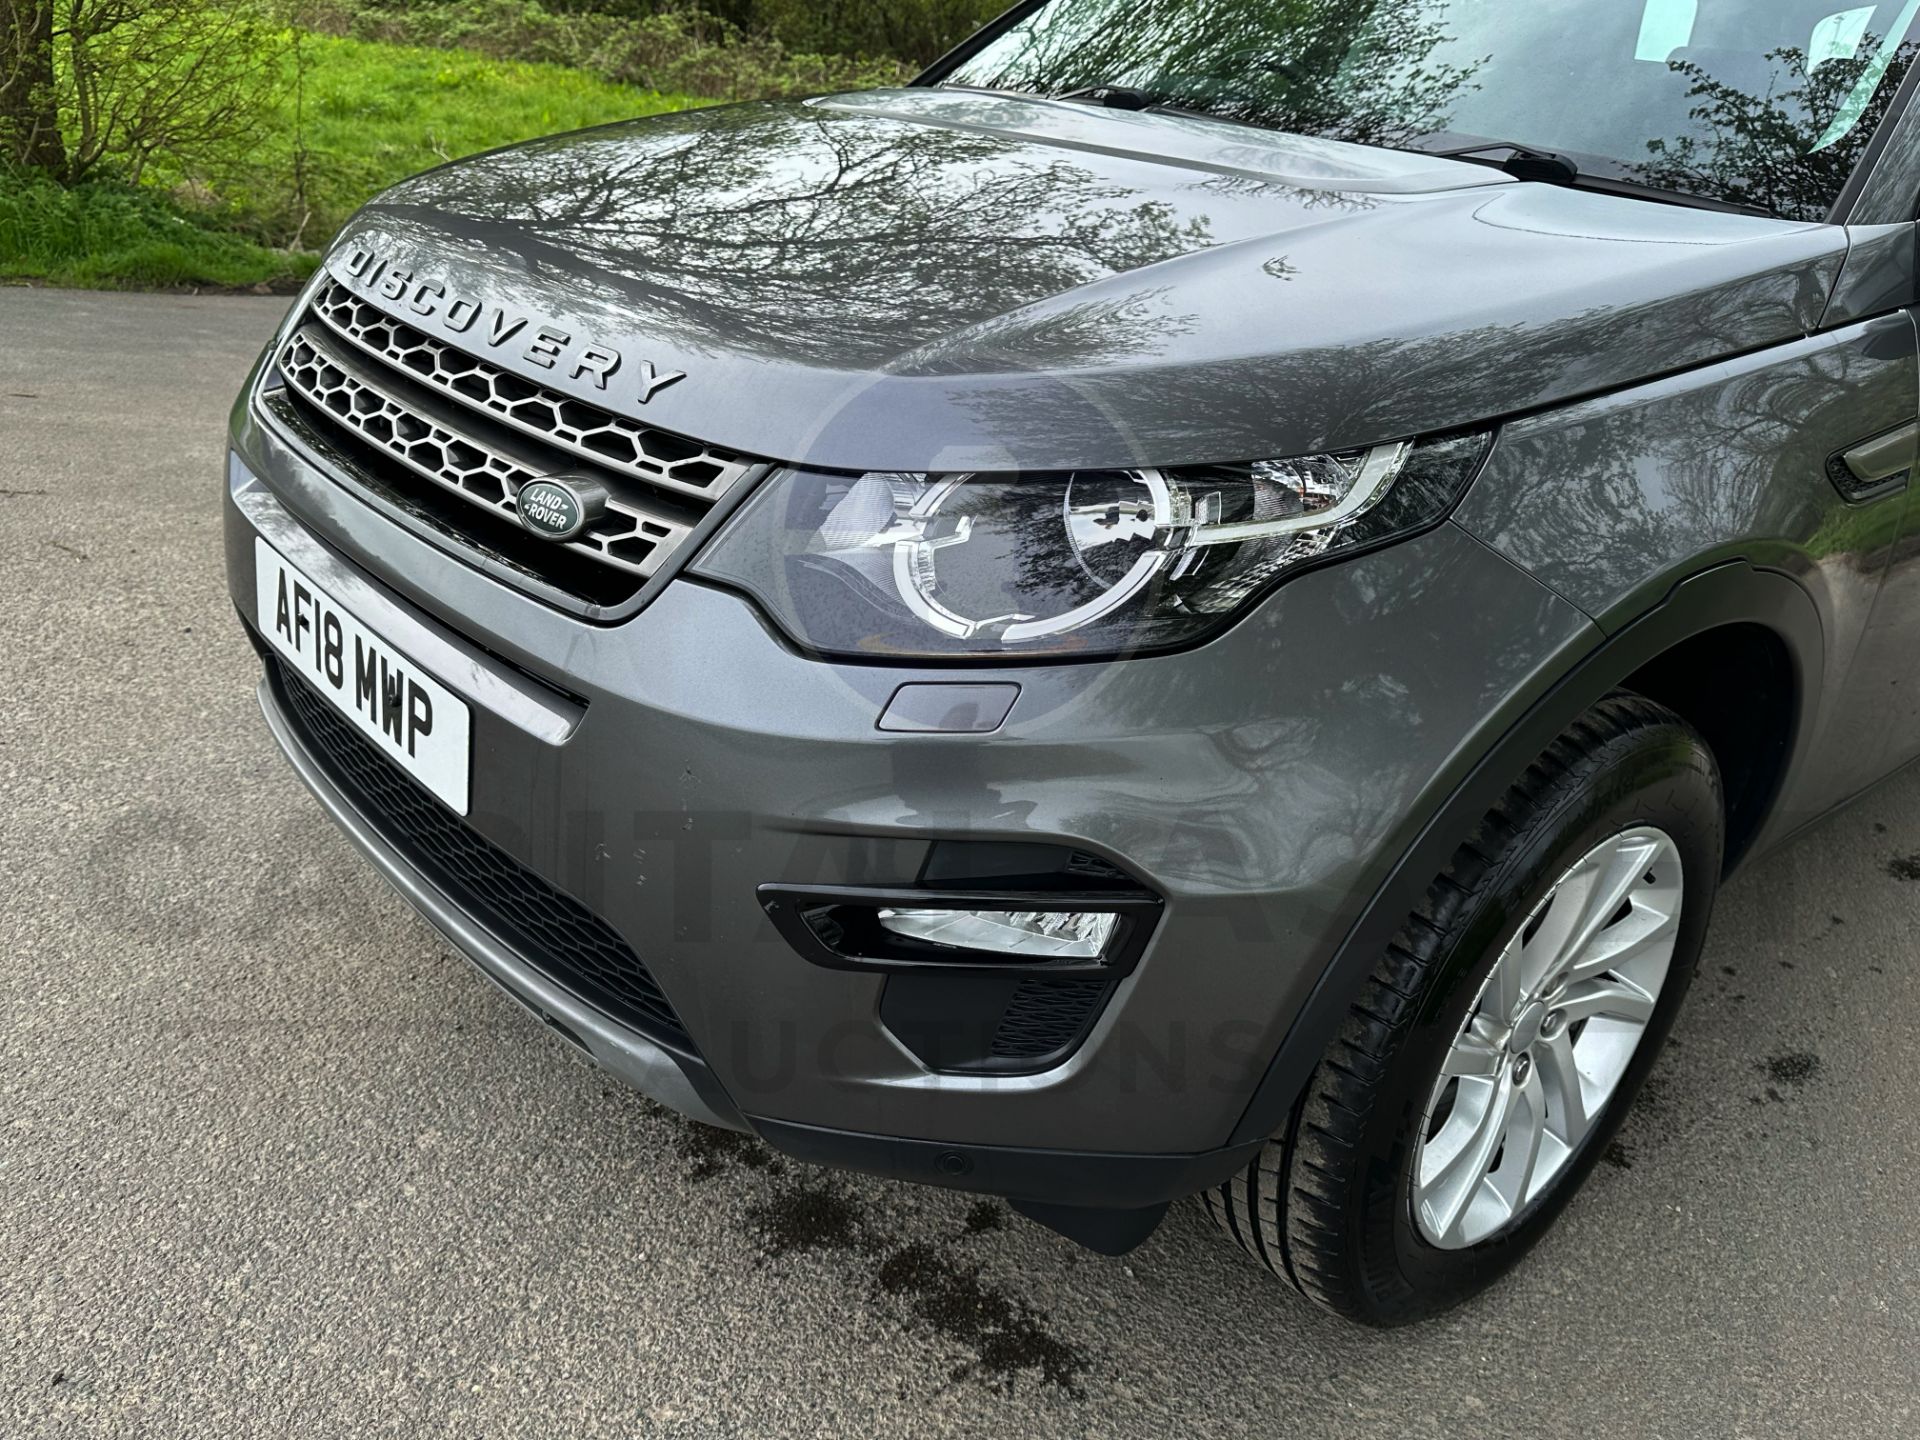 (On Sale) LAND ROVER DISCOVERY SPORT *SE TECH* 5 DOOR SUV (2018 - EURO 6) 2.0 TD4 - AUTO *HUGE SPEC* - Image 16 of 51